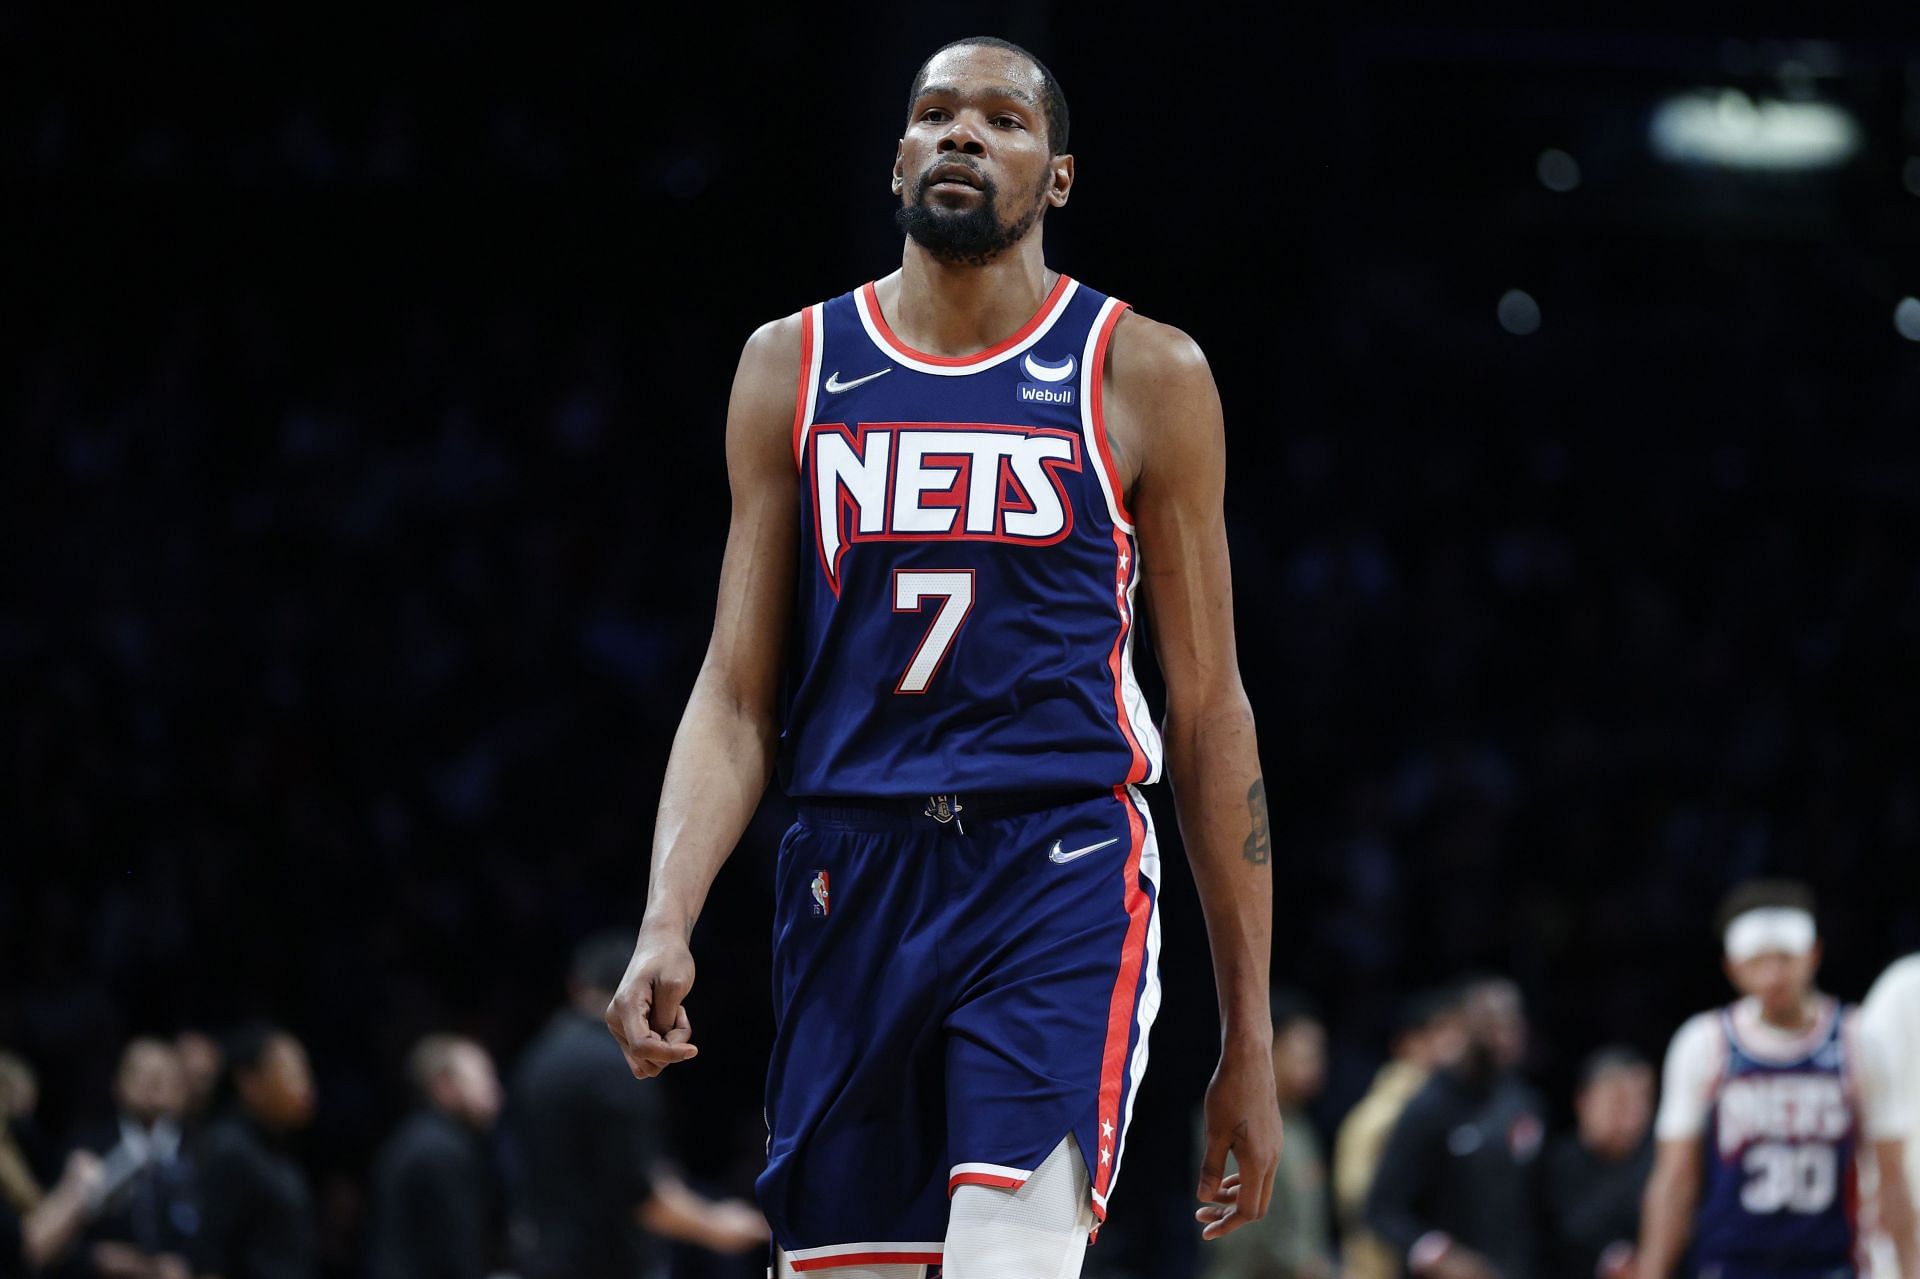 Kevin Durant of the Brooklyn Nets looks on against the Portland Trail Blazers at Barclays Center on Friday in the Brooklyn borough of New York City. The Nets won 128-123.